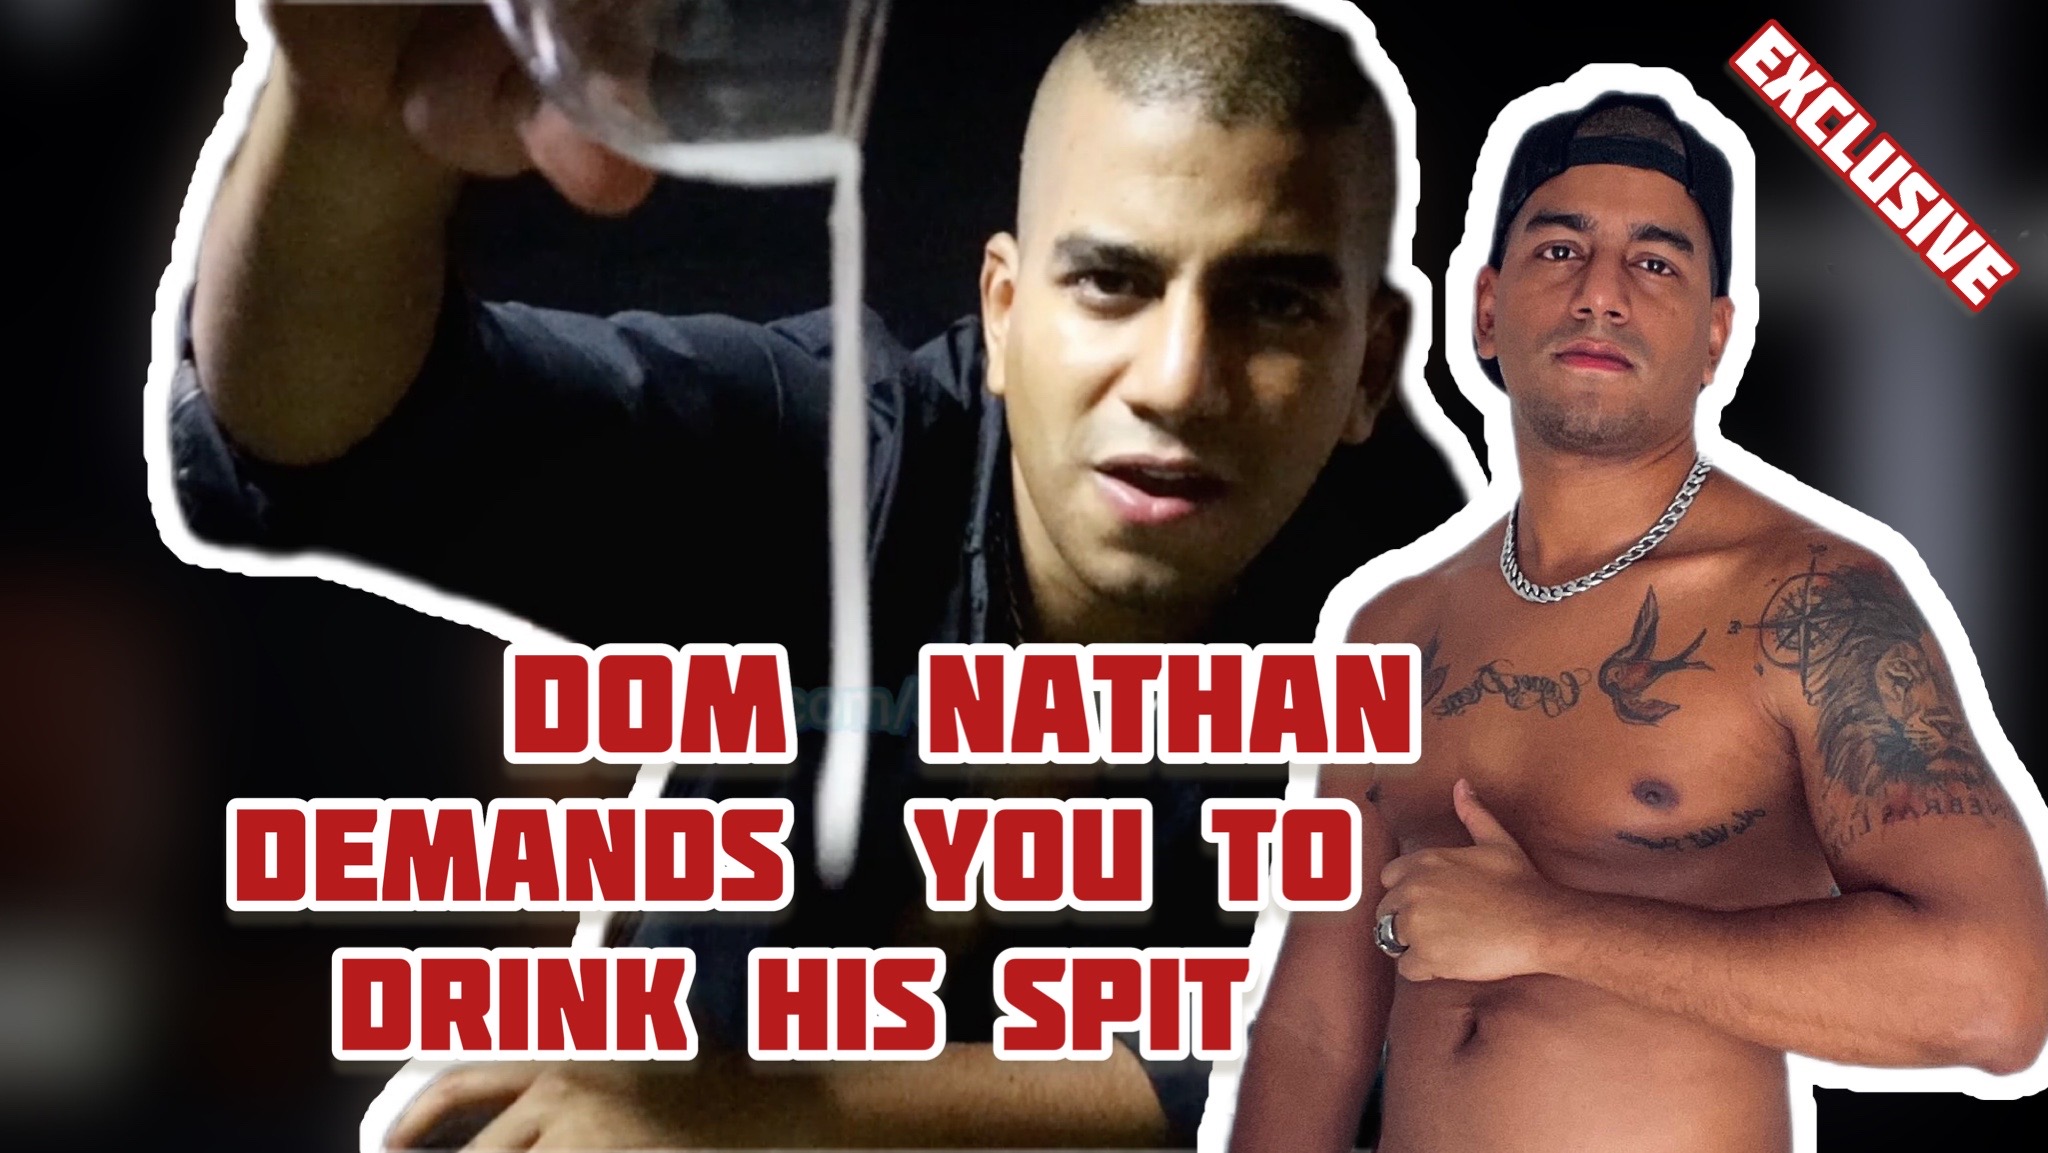 Dom Nathan Damands You Drink His Spit -Exclusive teaser